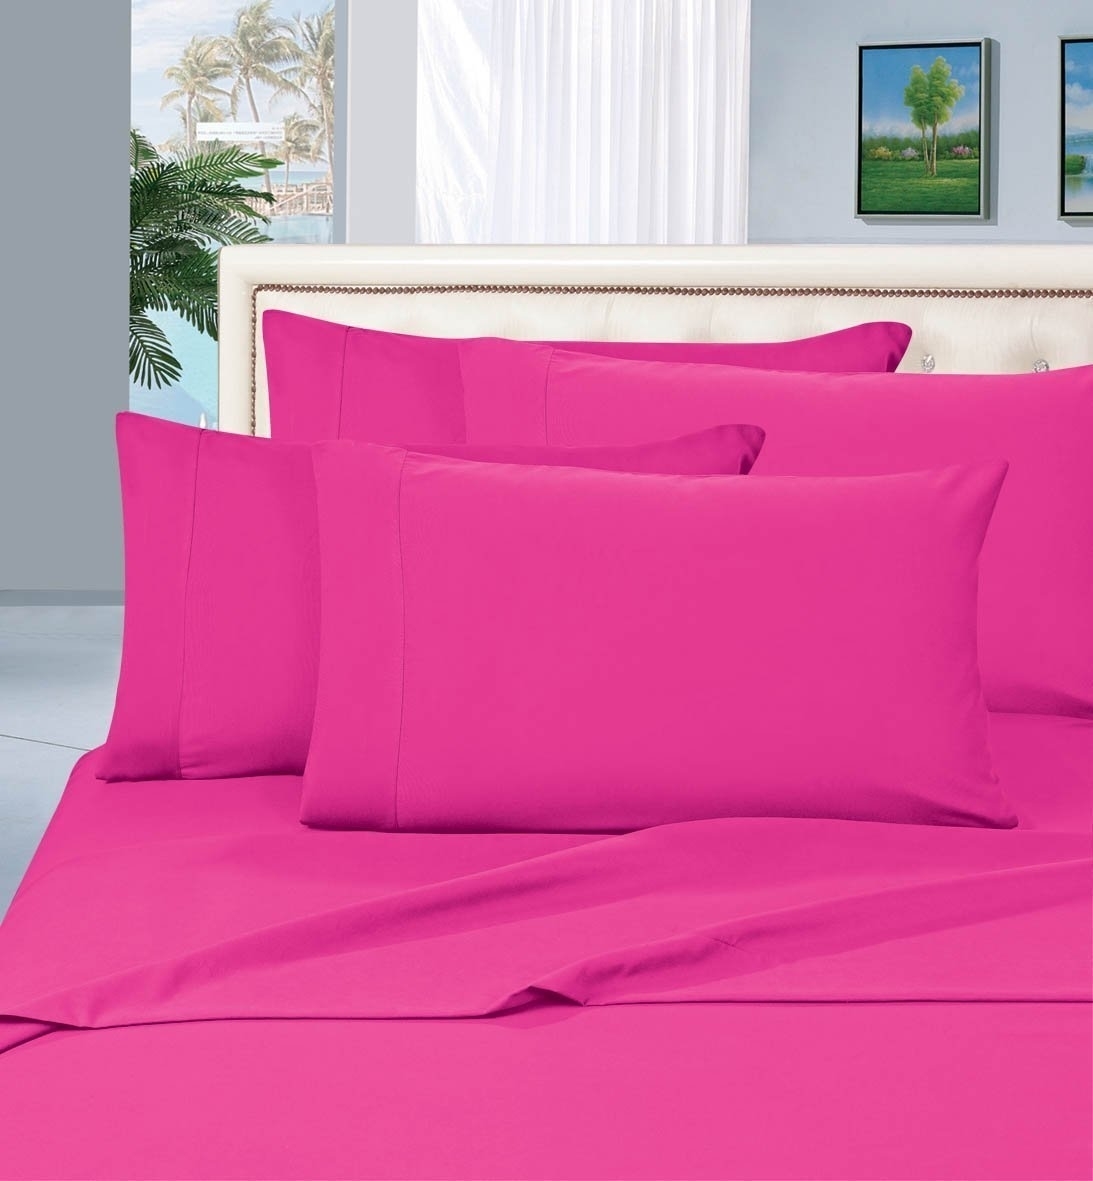 Elegant Comfort 1500 Series Wrinkle Resistant Egyptian Quality Hypoallergenic Ultra Soft Luxury 3-piece Bed Sheet Set, Twin, Hot Pink